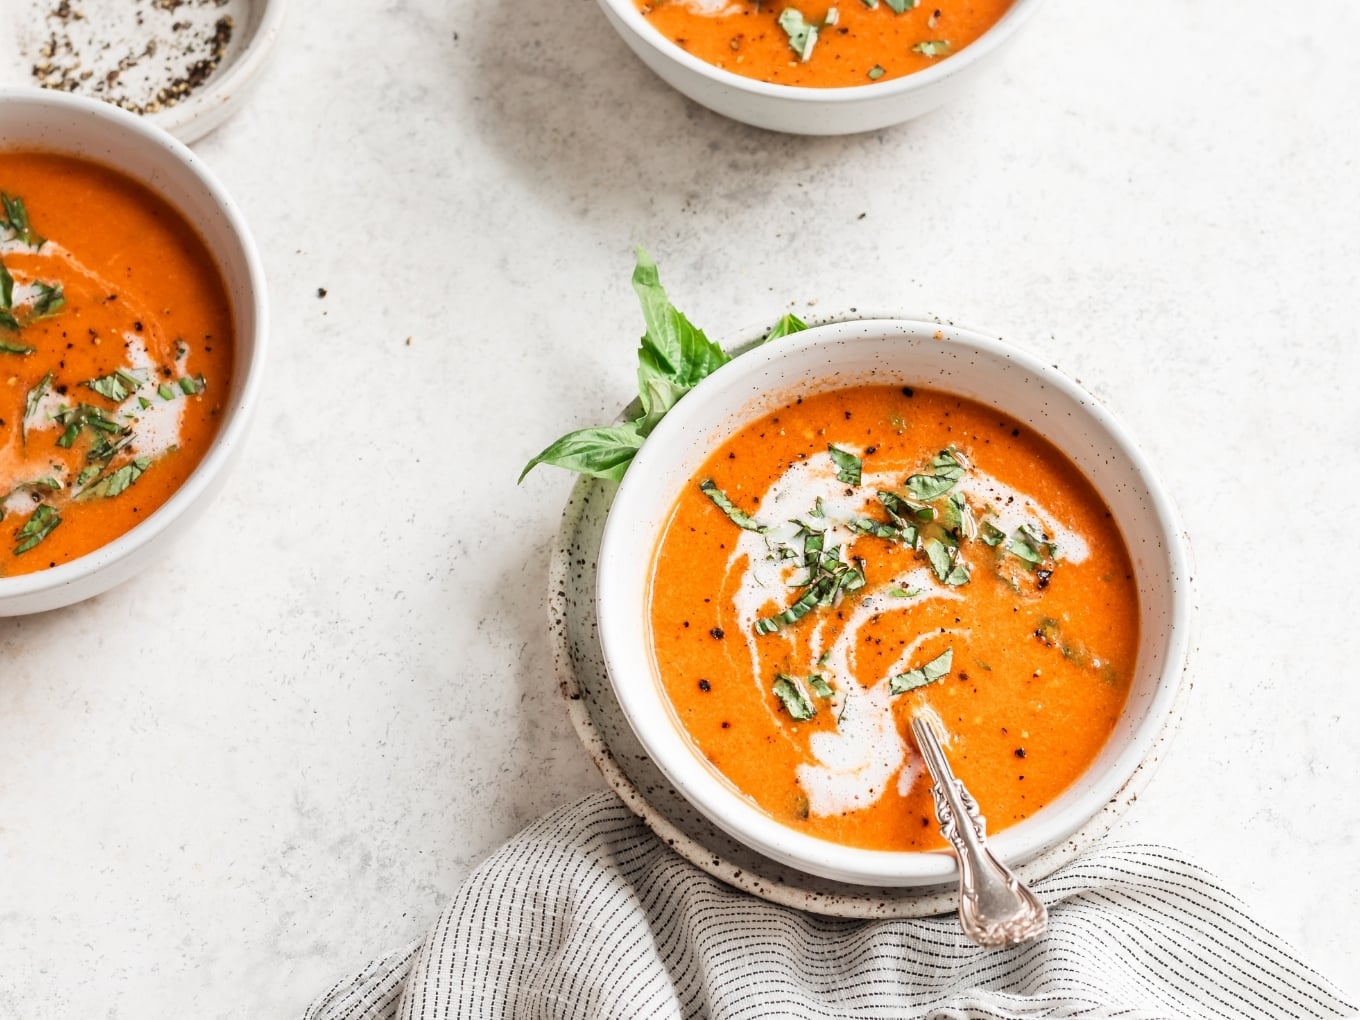 https://thewholecook.com/wp-content/uploads/2021/02/30-Minute-Dairy-Free-Tomato-Basil-Soup-by-The-Whole-Cook-horizontal1.jpg